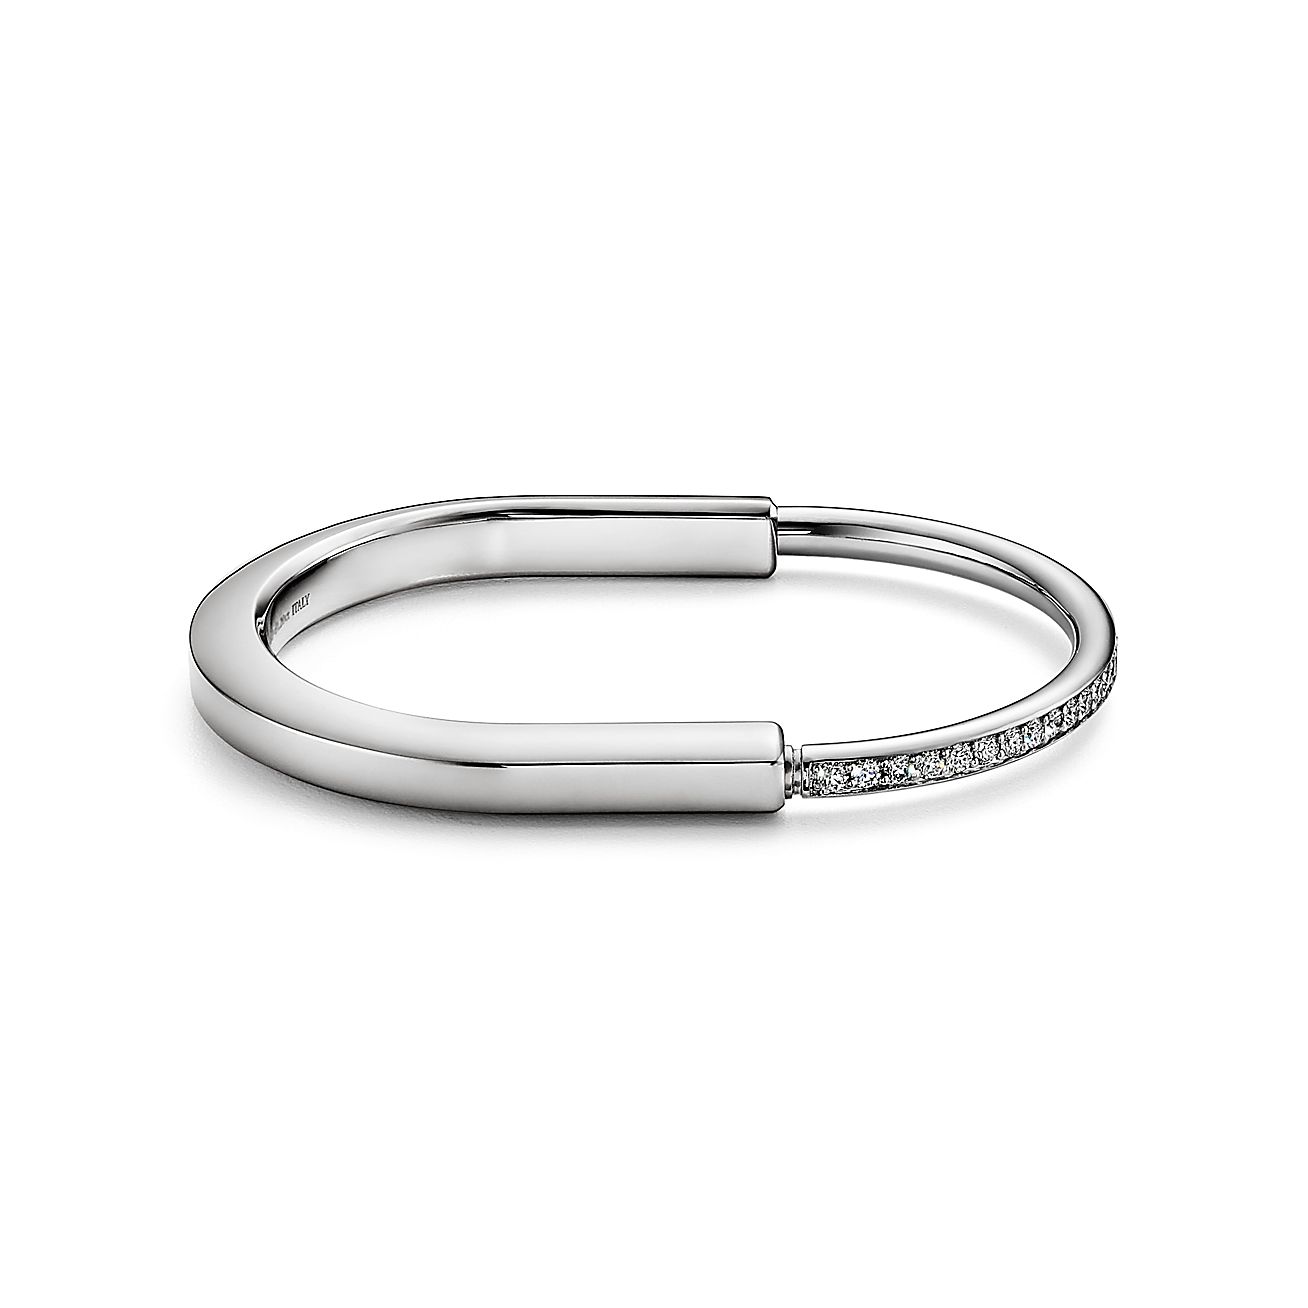 The it-bangle battle: Can the Tiffany Lock challenge the Cartier Love?